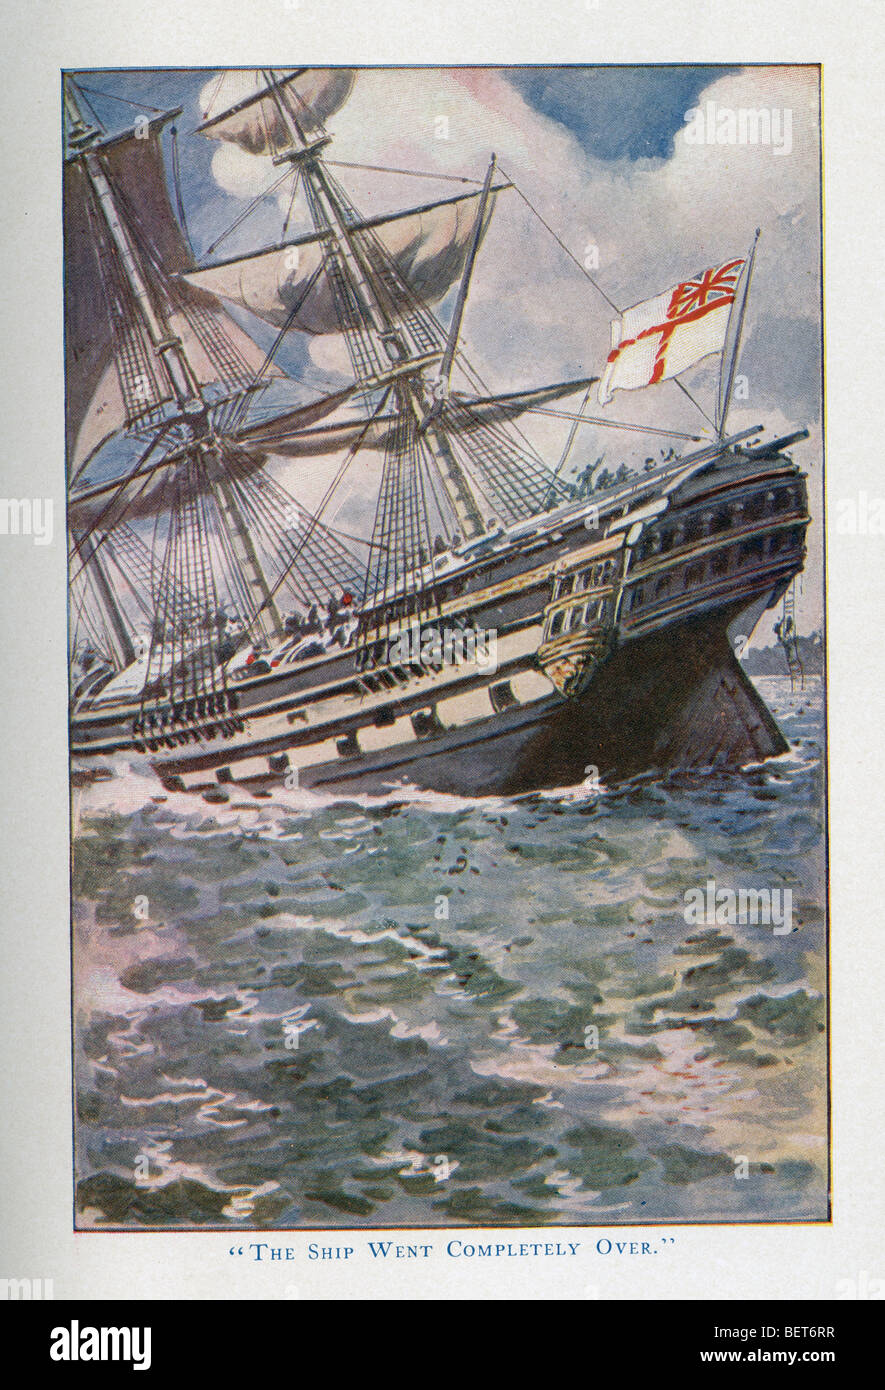 100 year old book picture 'The ship went completely over' Stock Photo